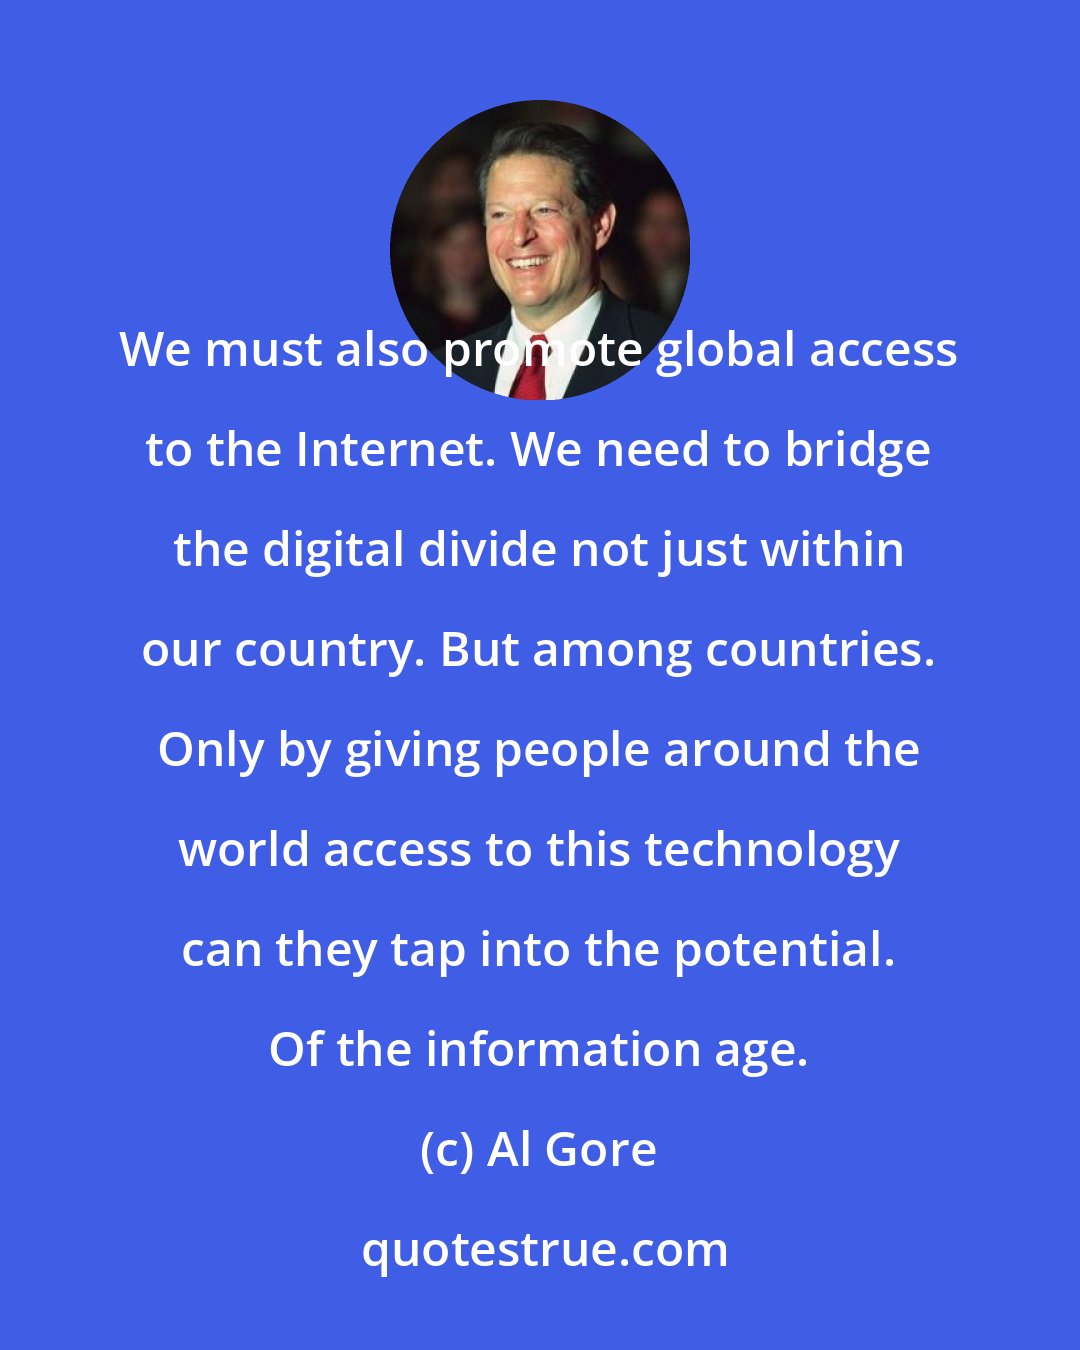 Al Gore: We must also promote global access to the Internet. We need to bridge the digital divide not just within our country. But among countries. Only by giving people around the world access to this technology can they tap into the potential. Of the information age.